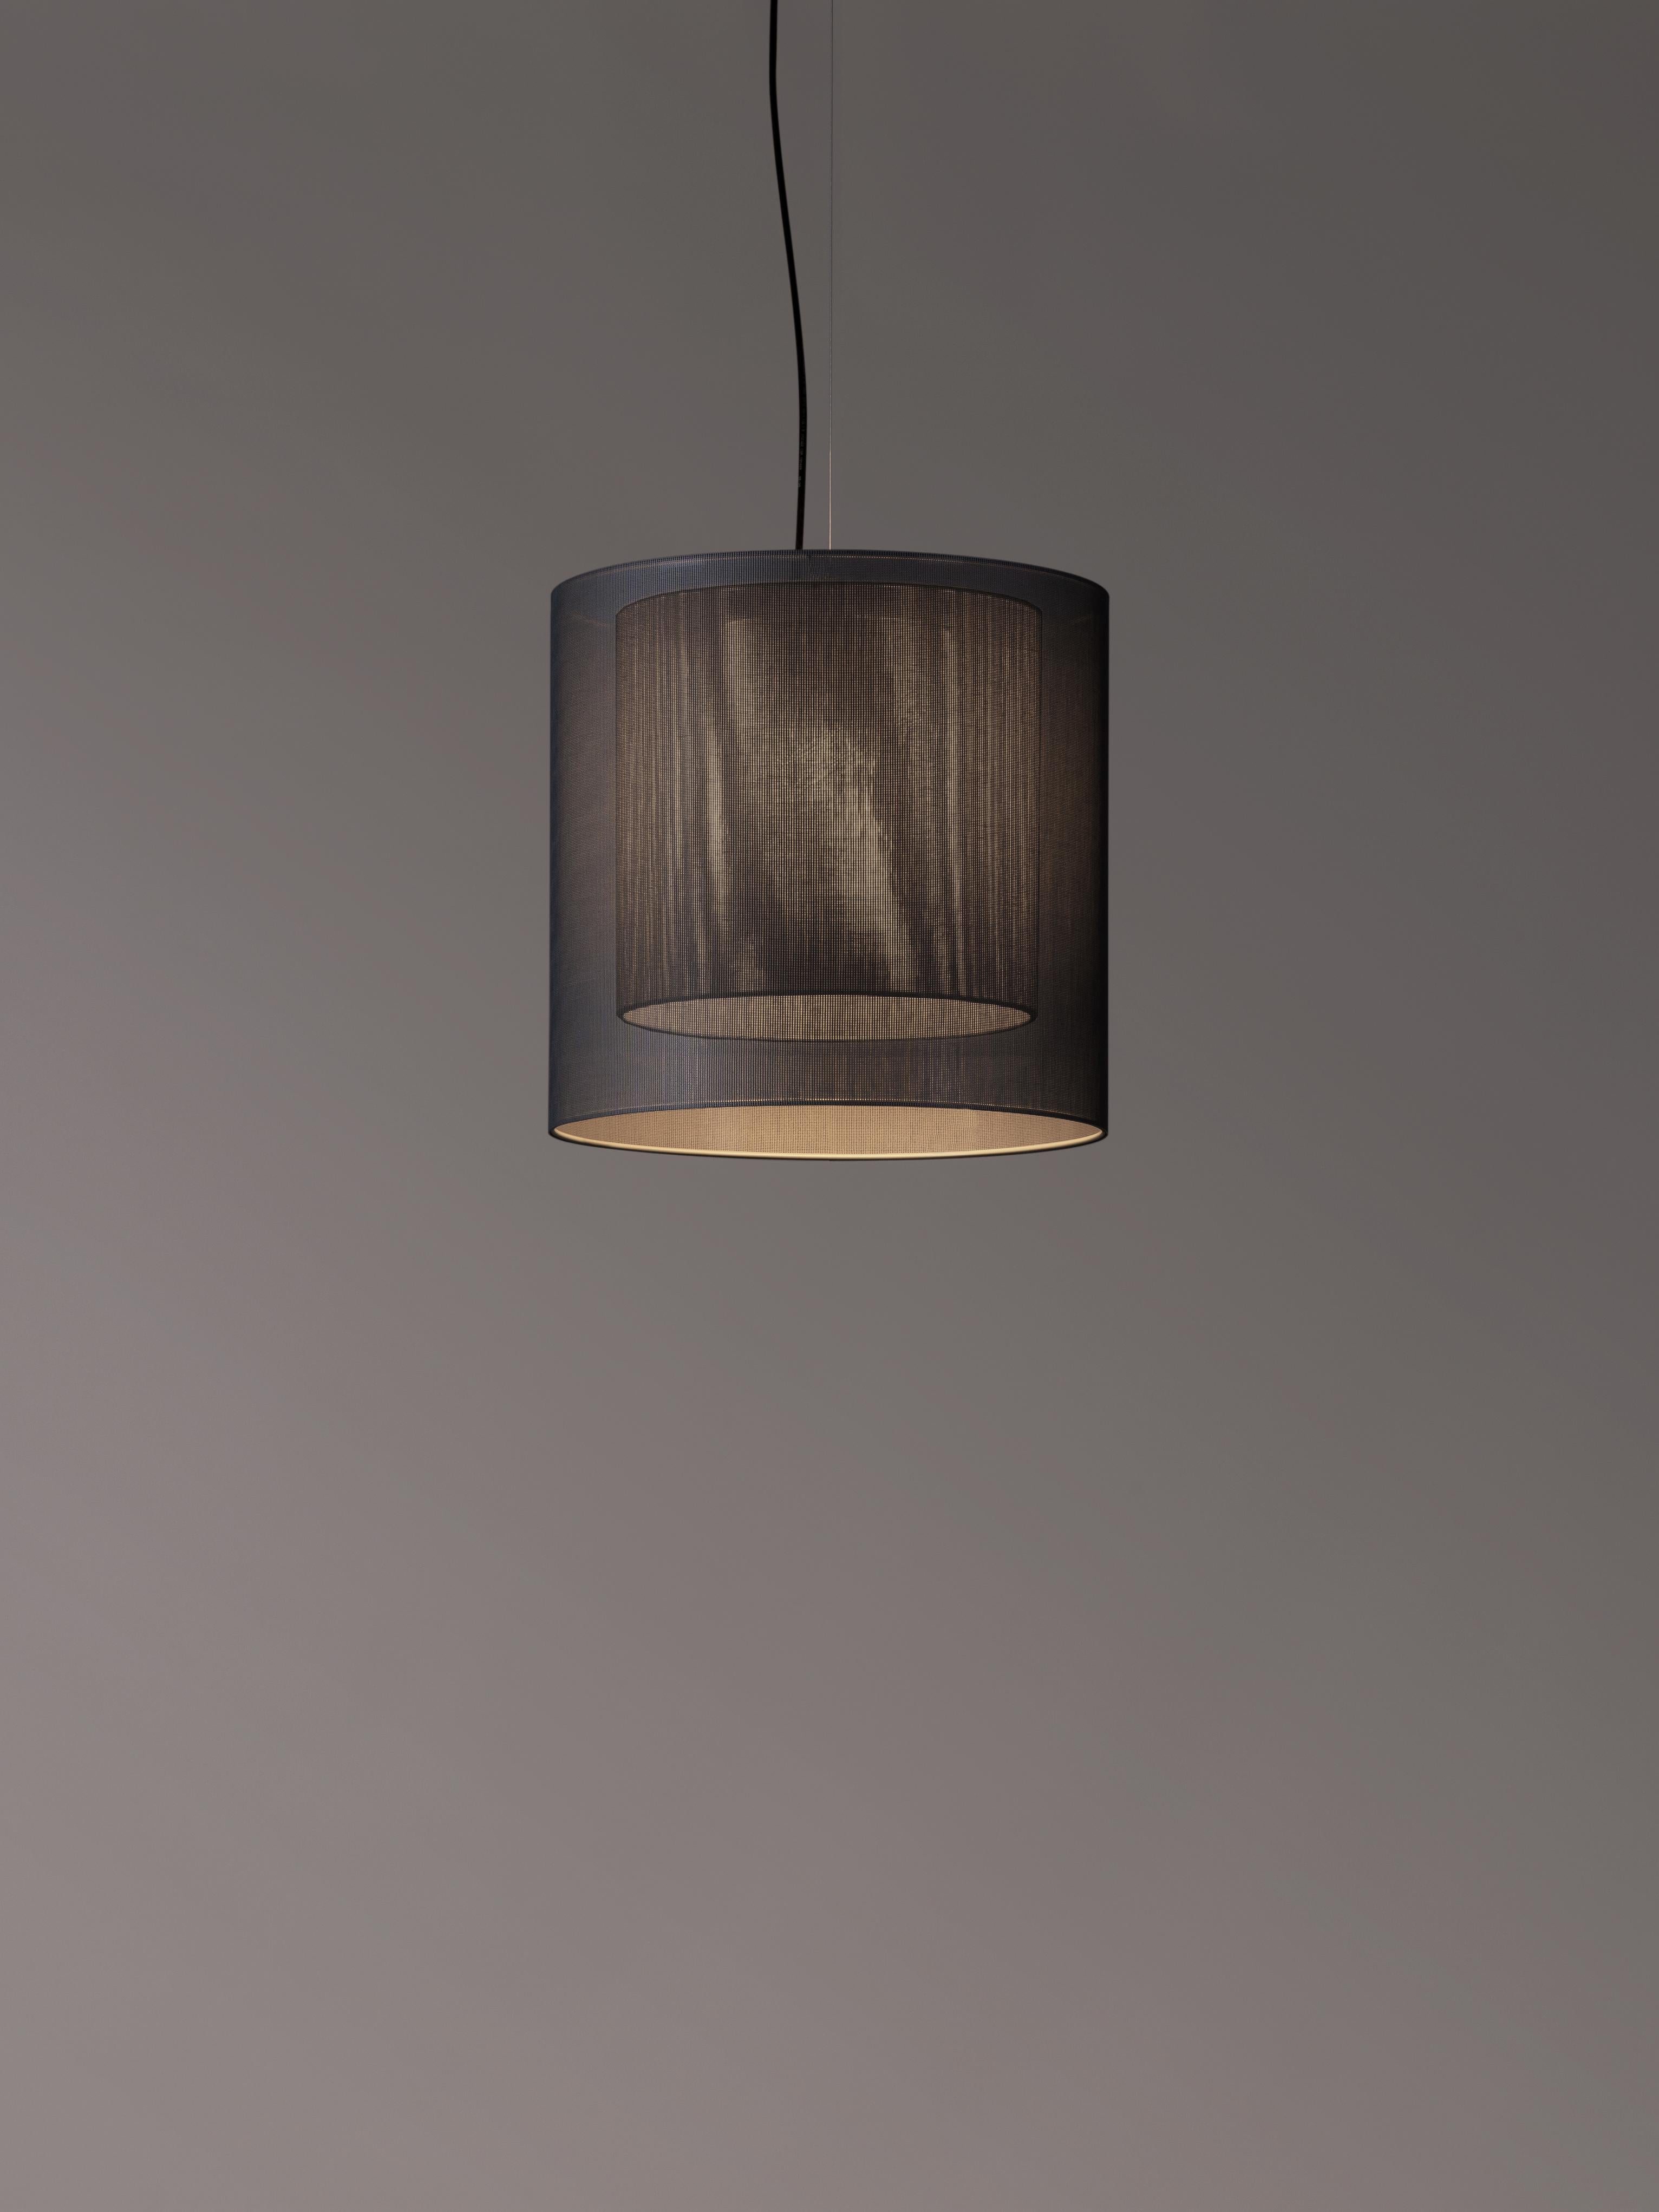 Grey Moaré MS pendant lamp by Antoni Arola
Dimensions: d 46 x h 45 cm
Materials: Metal, polyester.
Available in other colors and sizes.

Moaré’s multiple combinations of formats and colors make it highly versatile. The series takes its name